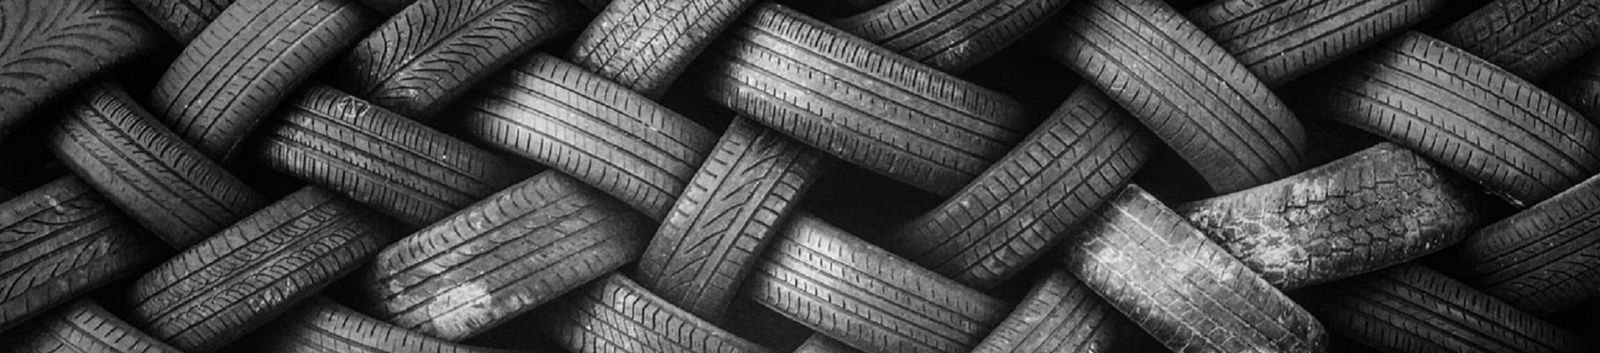 Tyre Stack banner image